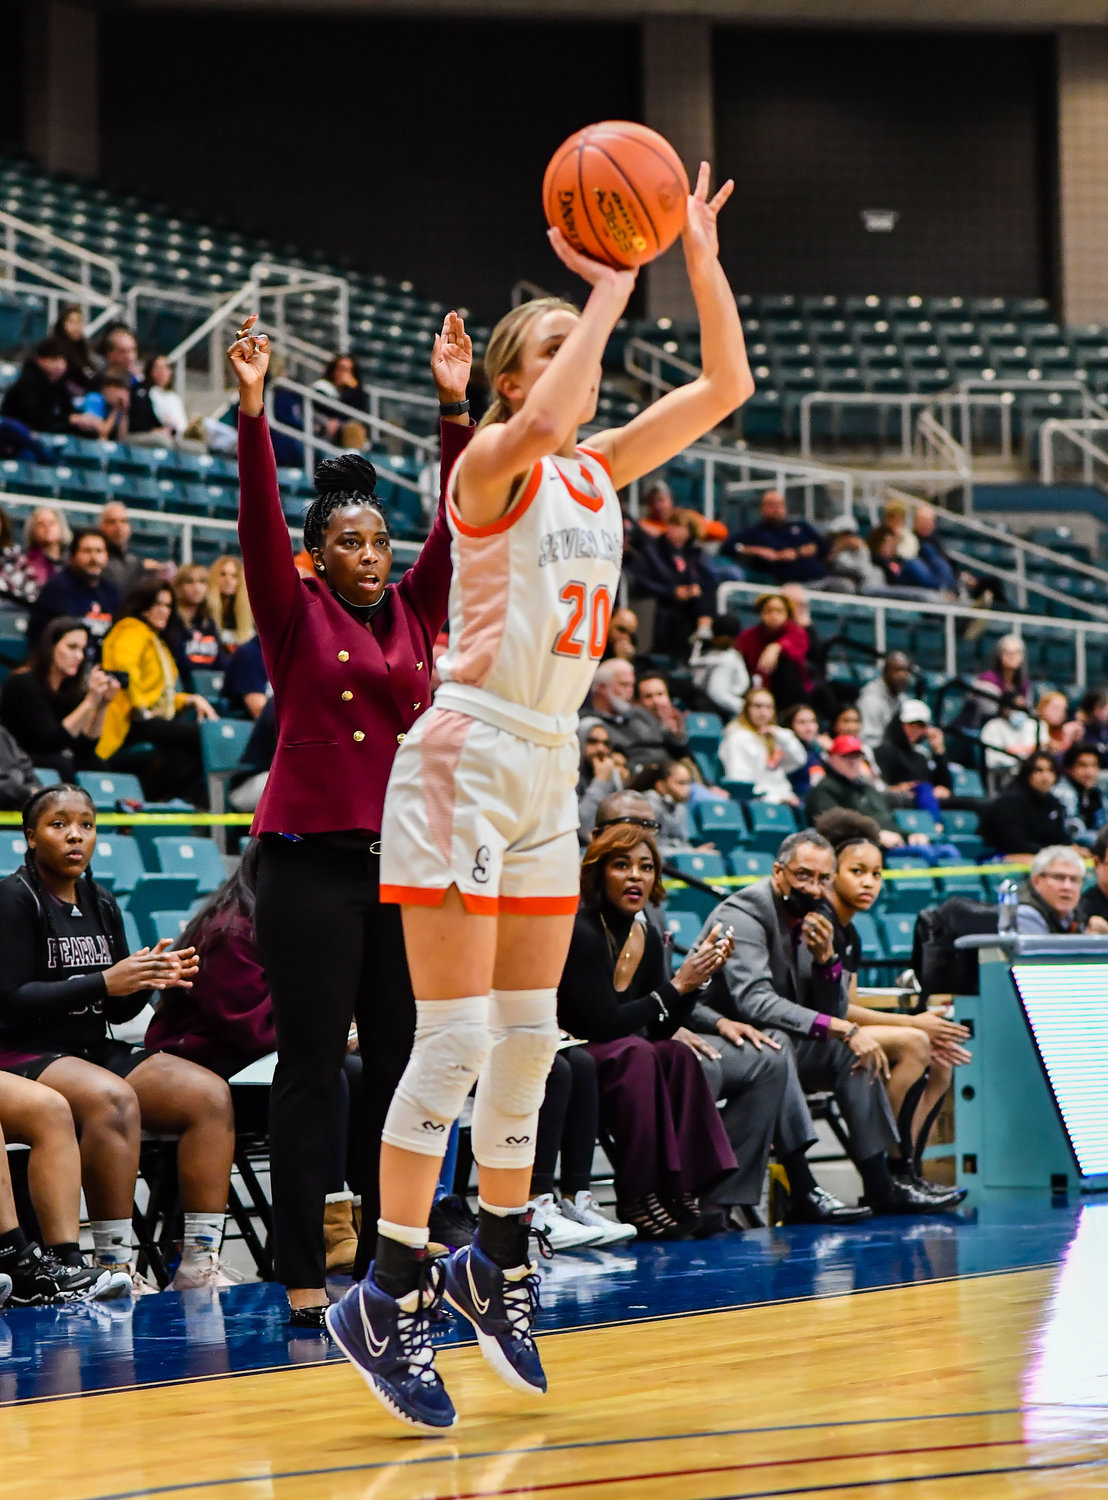 Katy Tx. Feb 25, 2022:  Seven Lakes Summer Halphen #20 goes up for the three point attempt during the Regional SemiFinal playoff game, Seven Lakes vs Pearland at the Merrell Center. (Photo by Mark Goodman / Katy Times)